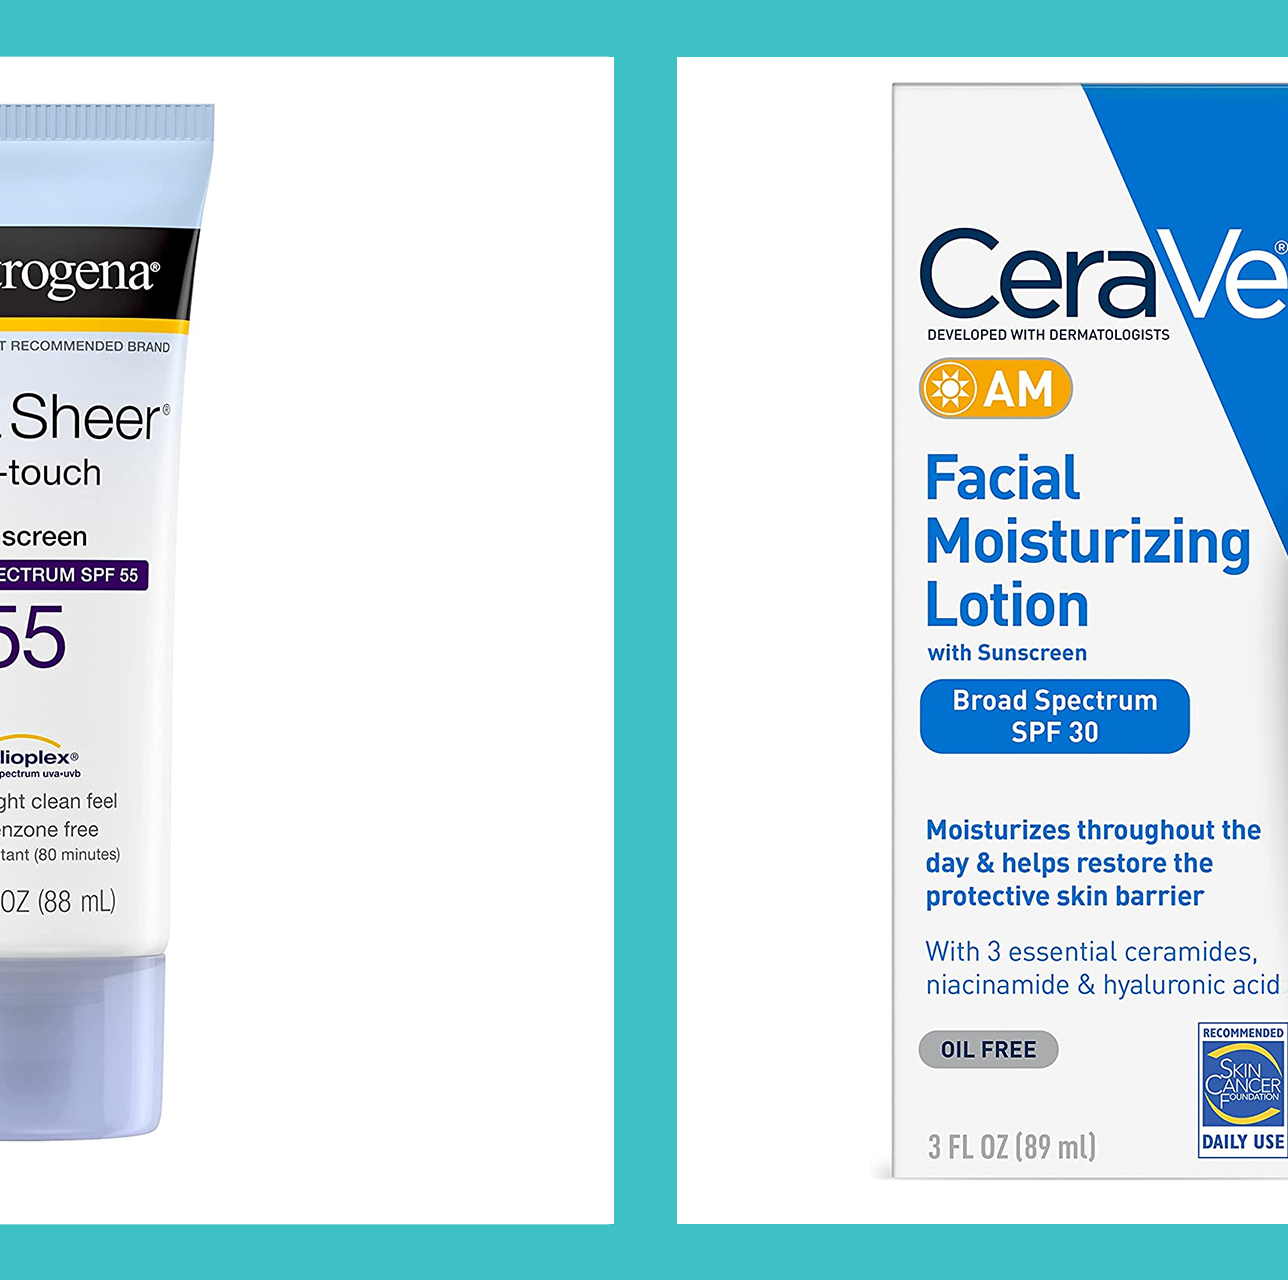 Amazon Secretly Has a Ton of Dermatologist-Approved Sunscreen on Sale Right Now